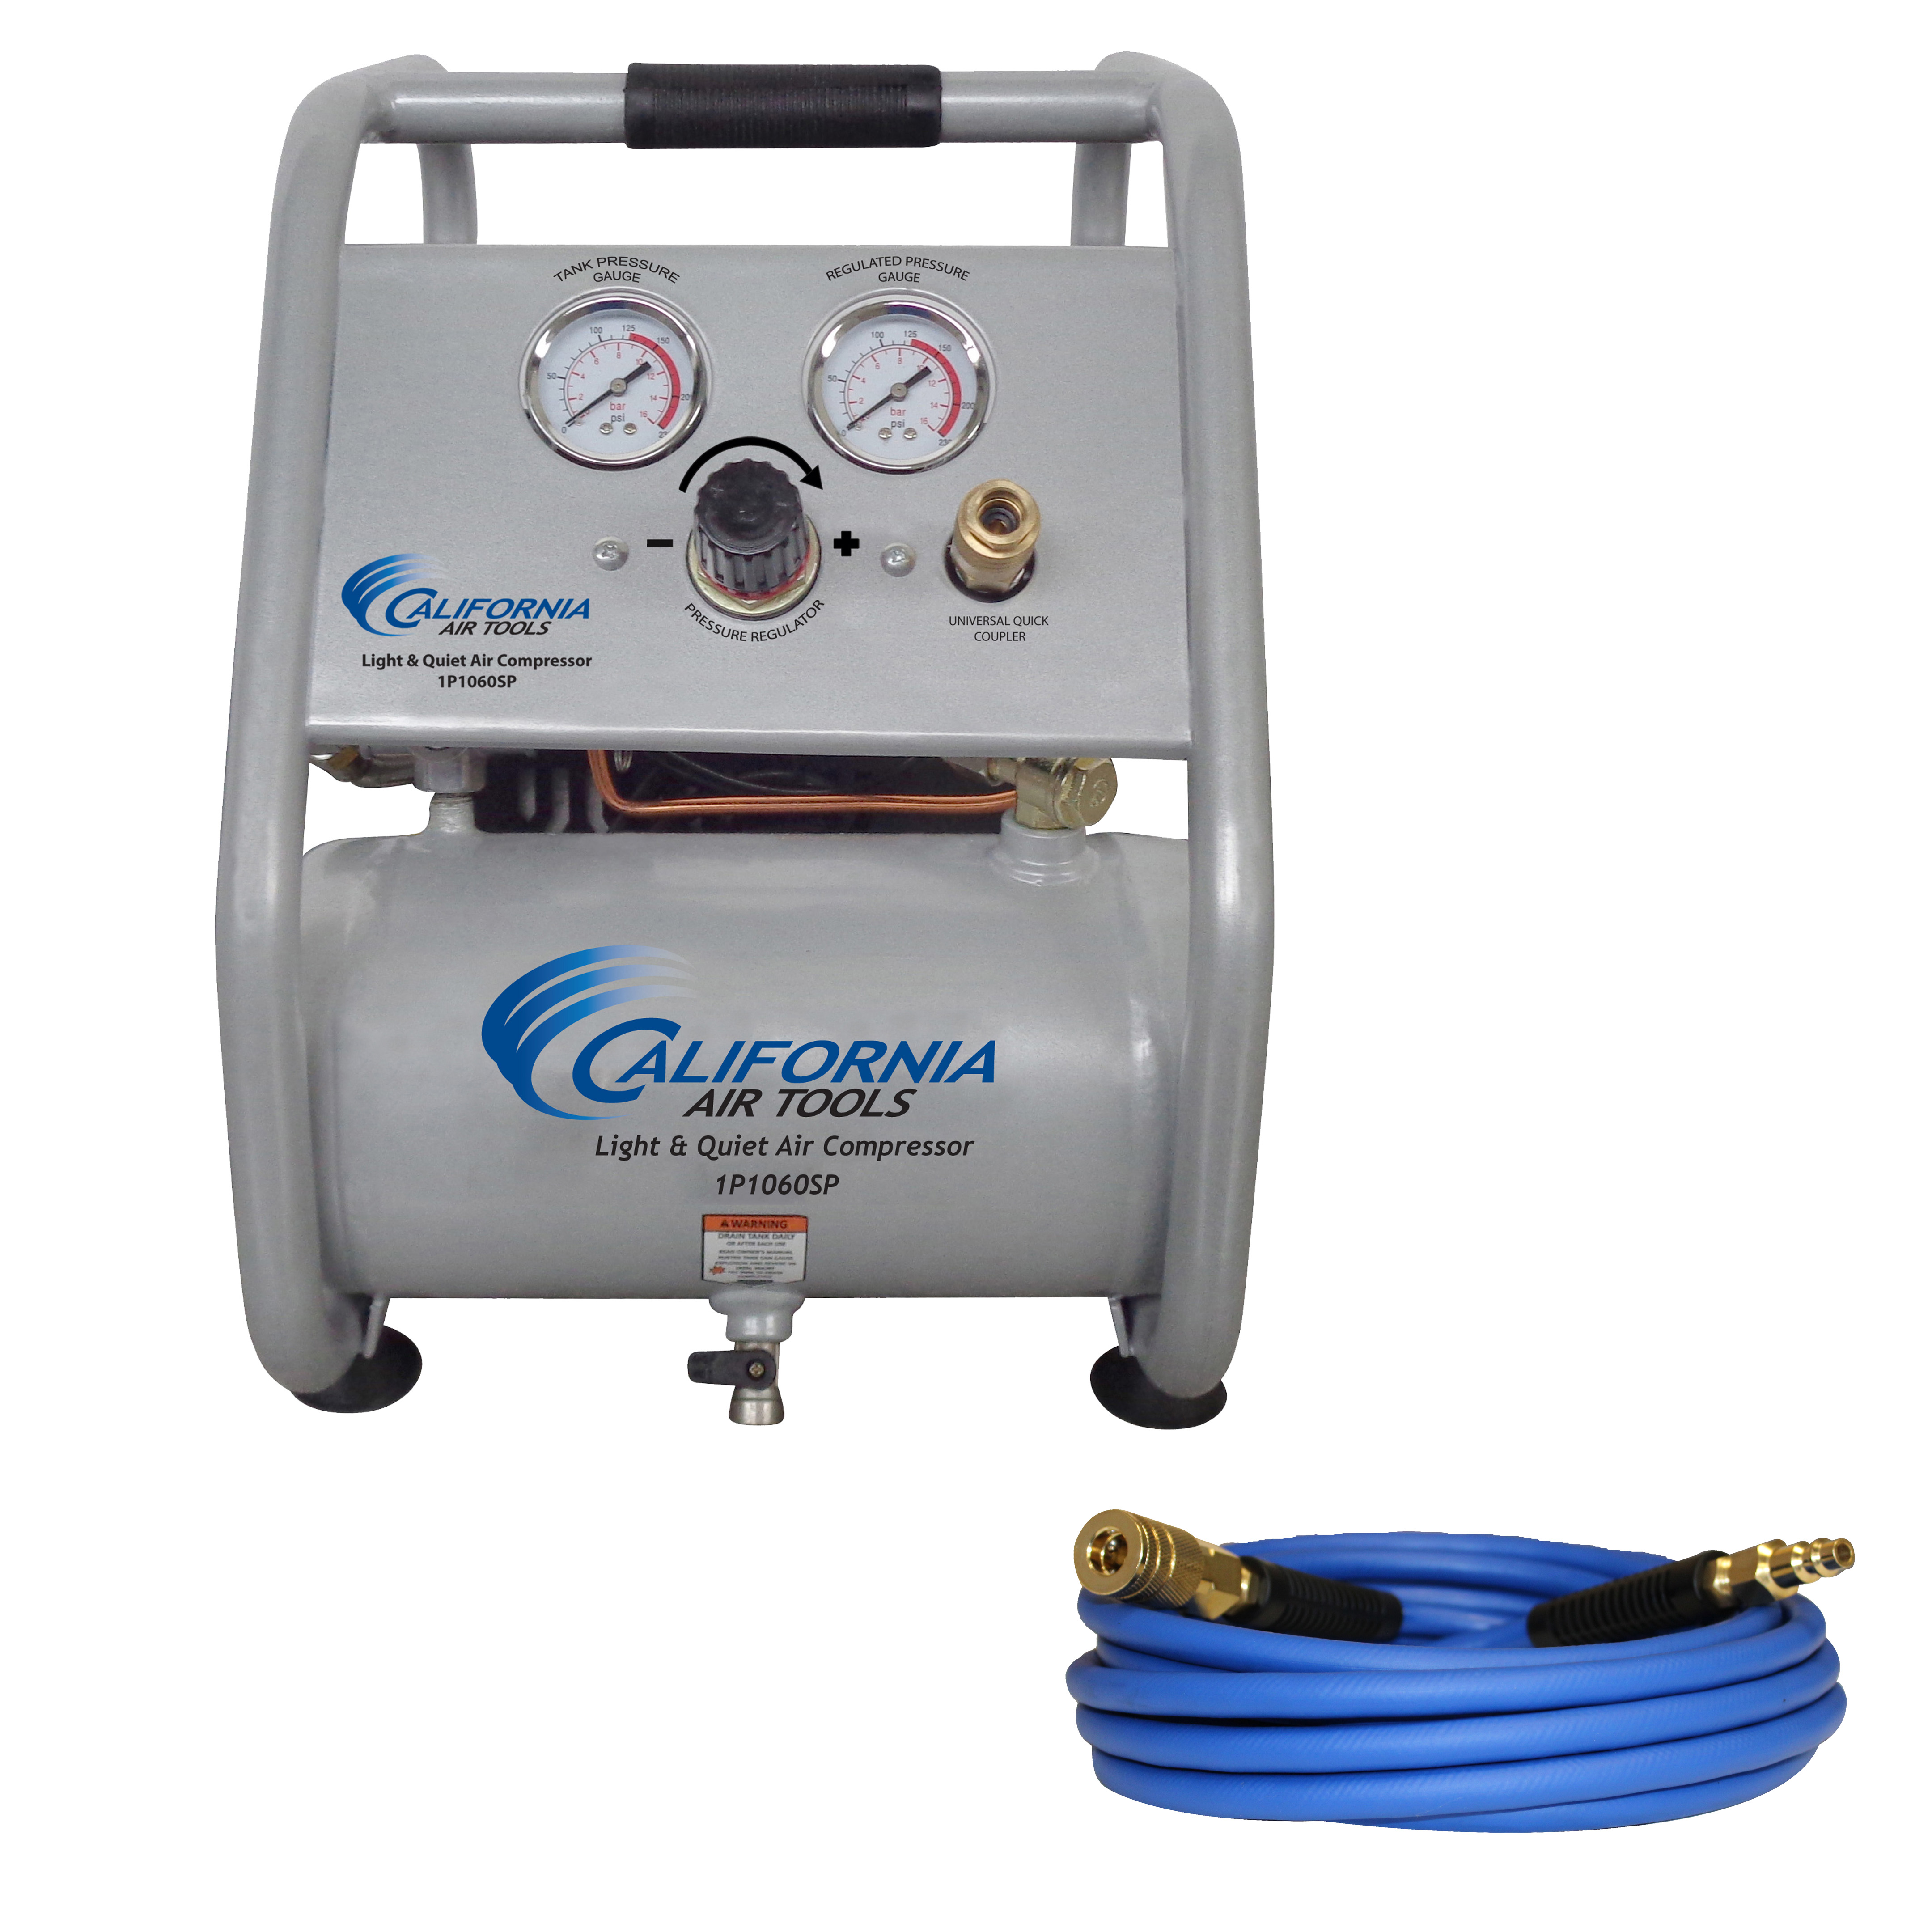 CALIFORNIA AIR TOOLS 1P1060SPH LIGHT & QUIET .6 HP, 1.0 GAL. STEEL TANK PORTABLE AIR COMPRESSOR WITH PANEL Hose Kit